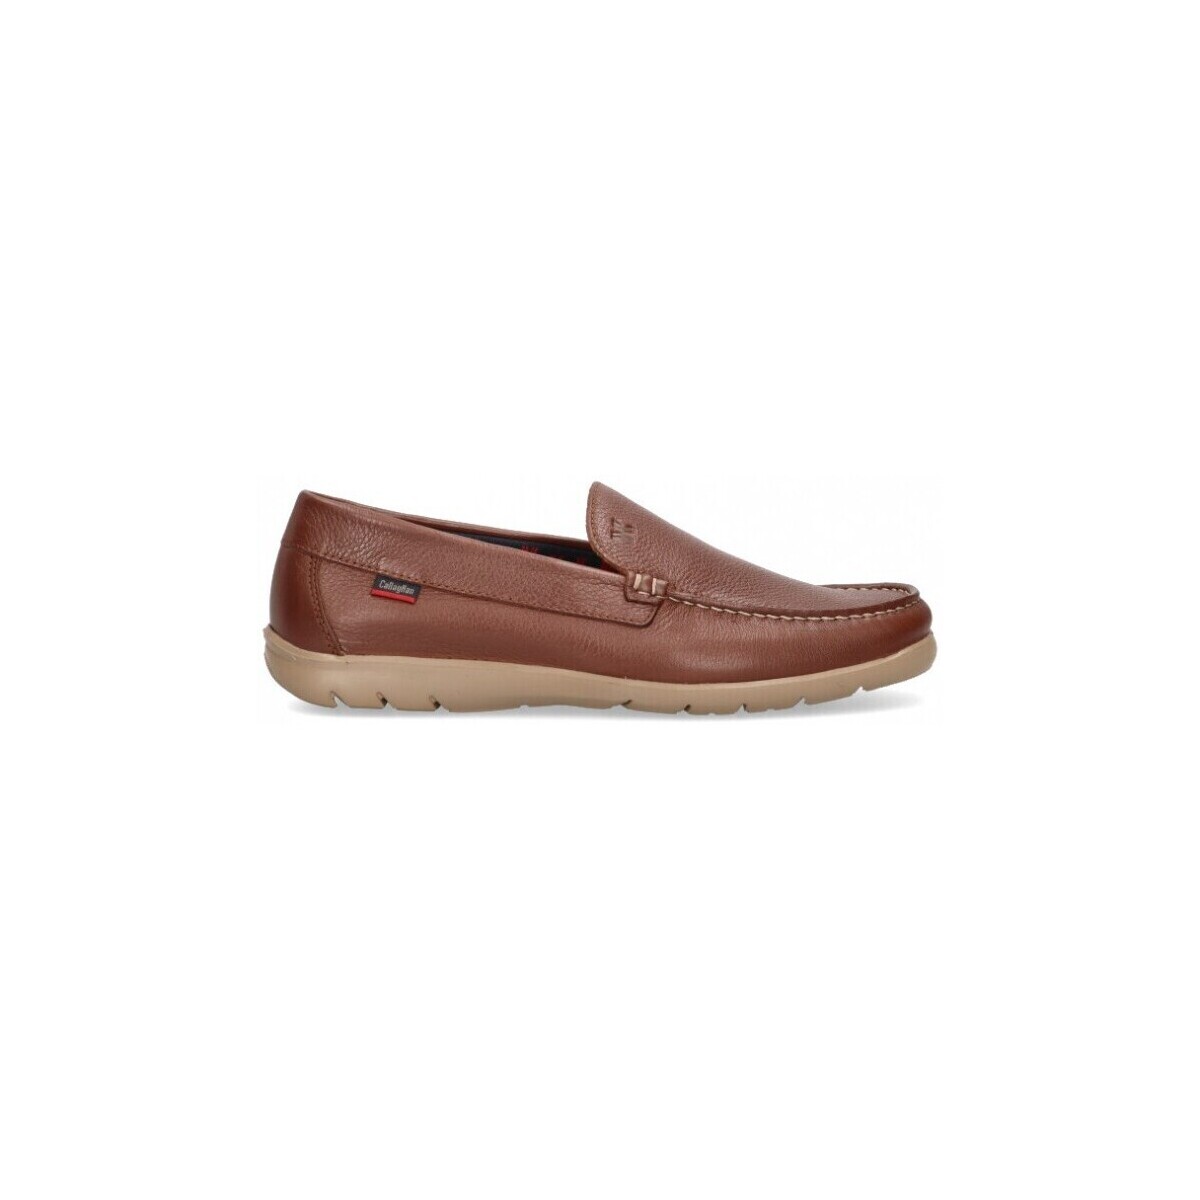 Boat shoes CallagHan 68920